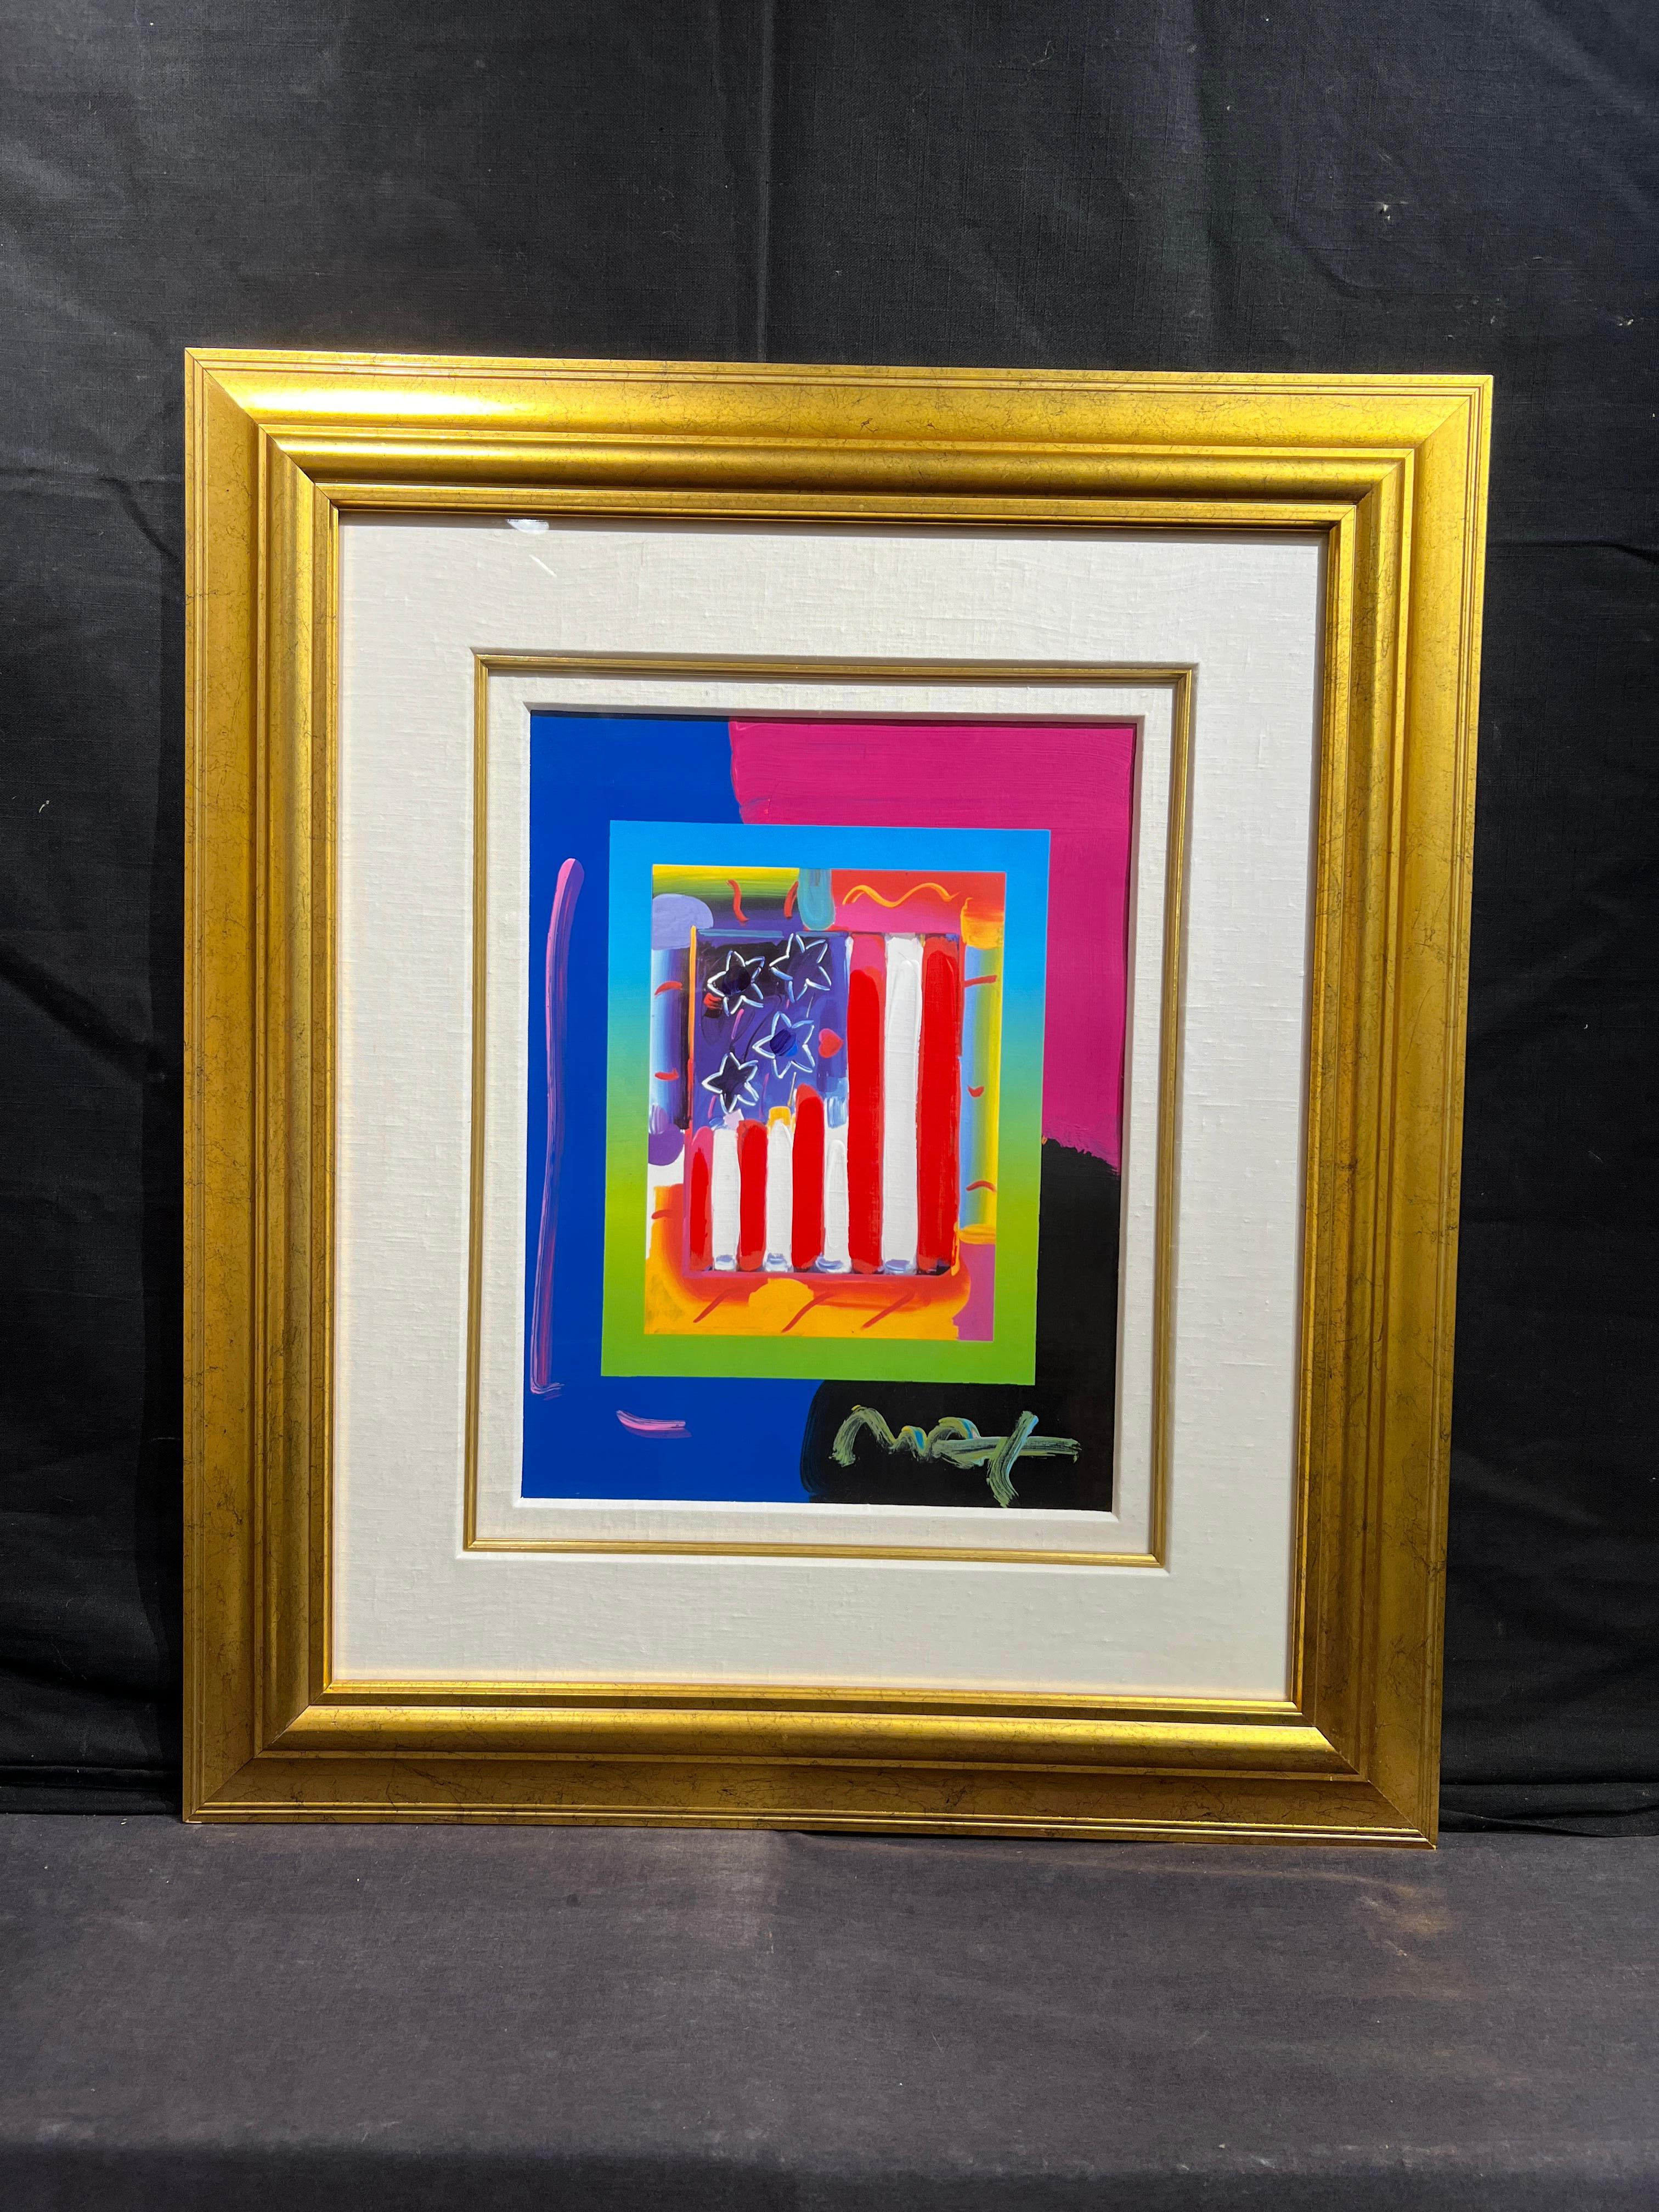 Peter Max (German, b. 1937)
Flag with Heart on Blends
Signed Lower Right
16.25 x 12 inches
31 x 26.5 inches with frame

Peter Max, born Peter Max Finkelstein,  is a multi-dimensional artist focused on contemporary events.  When he left art school in